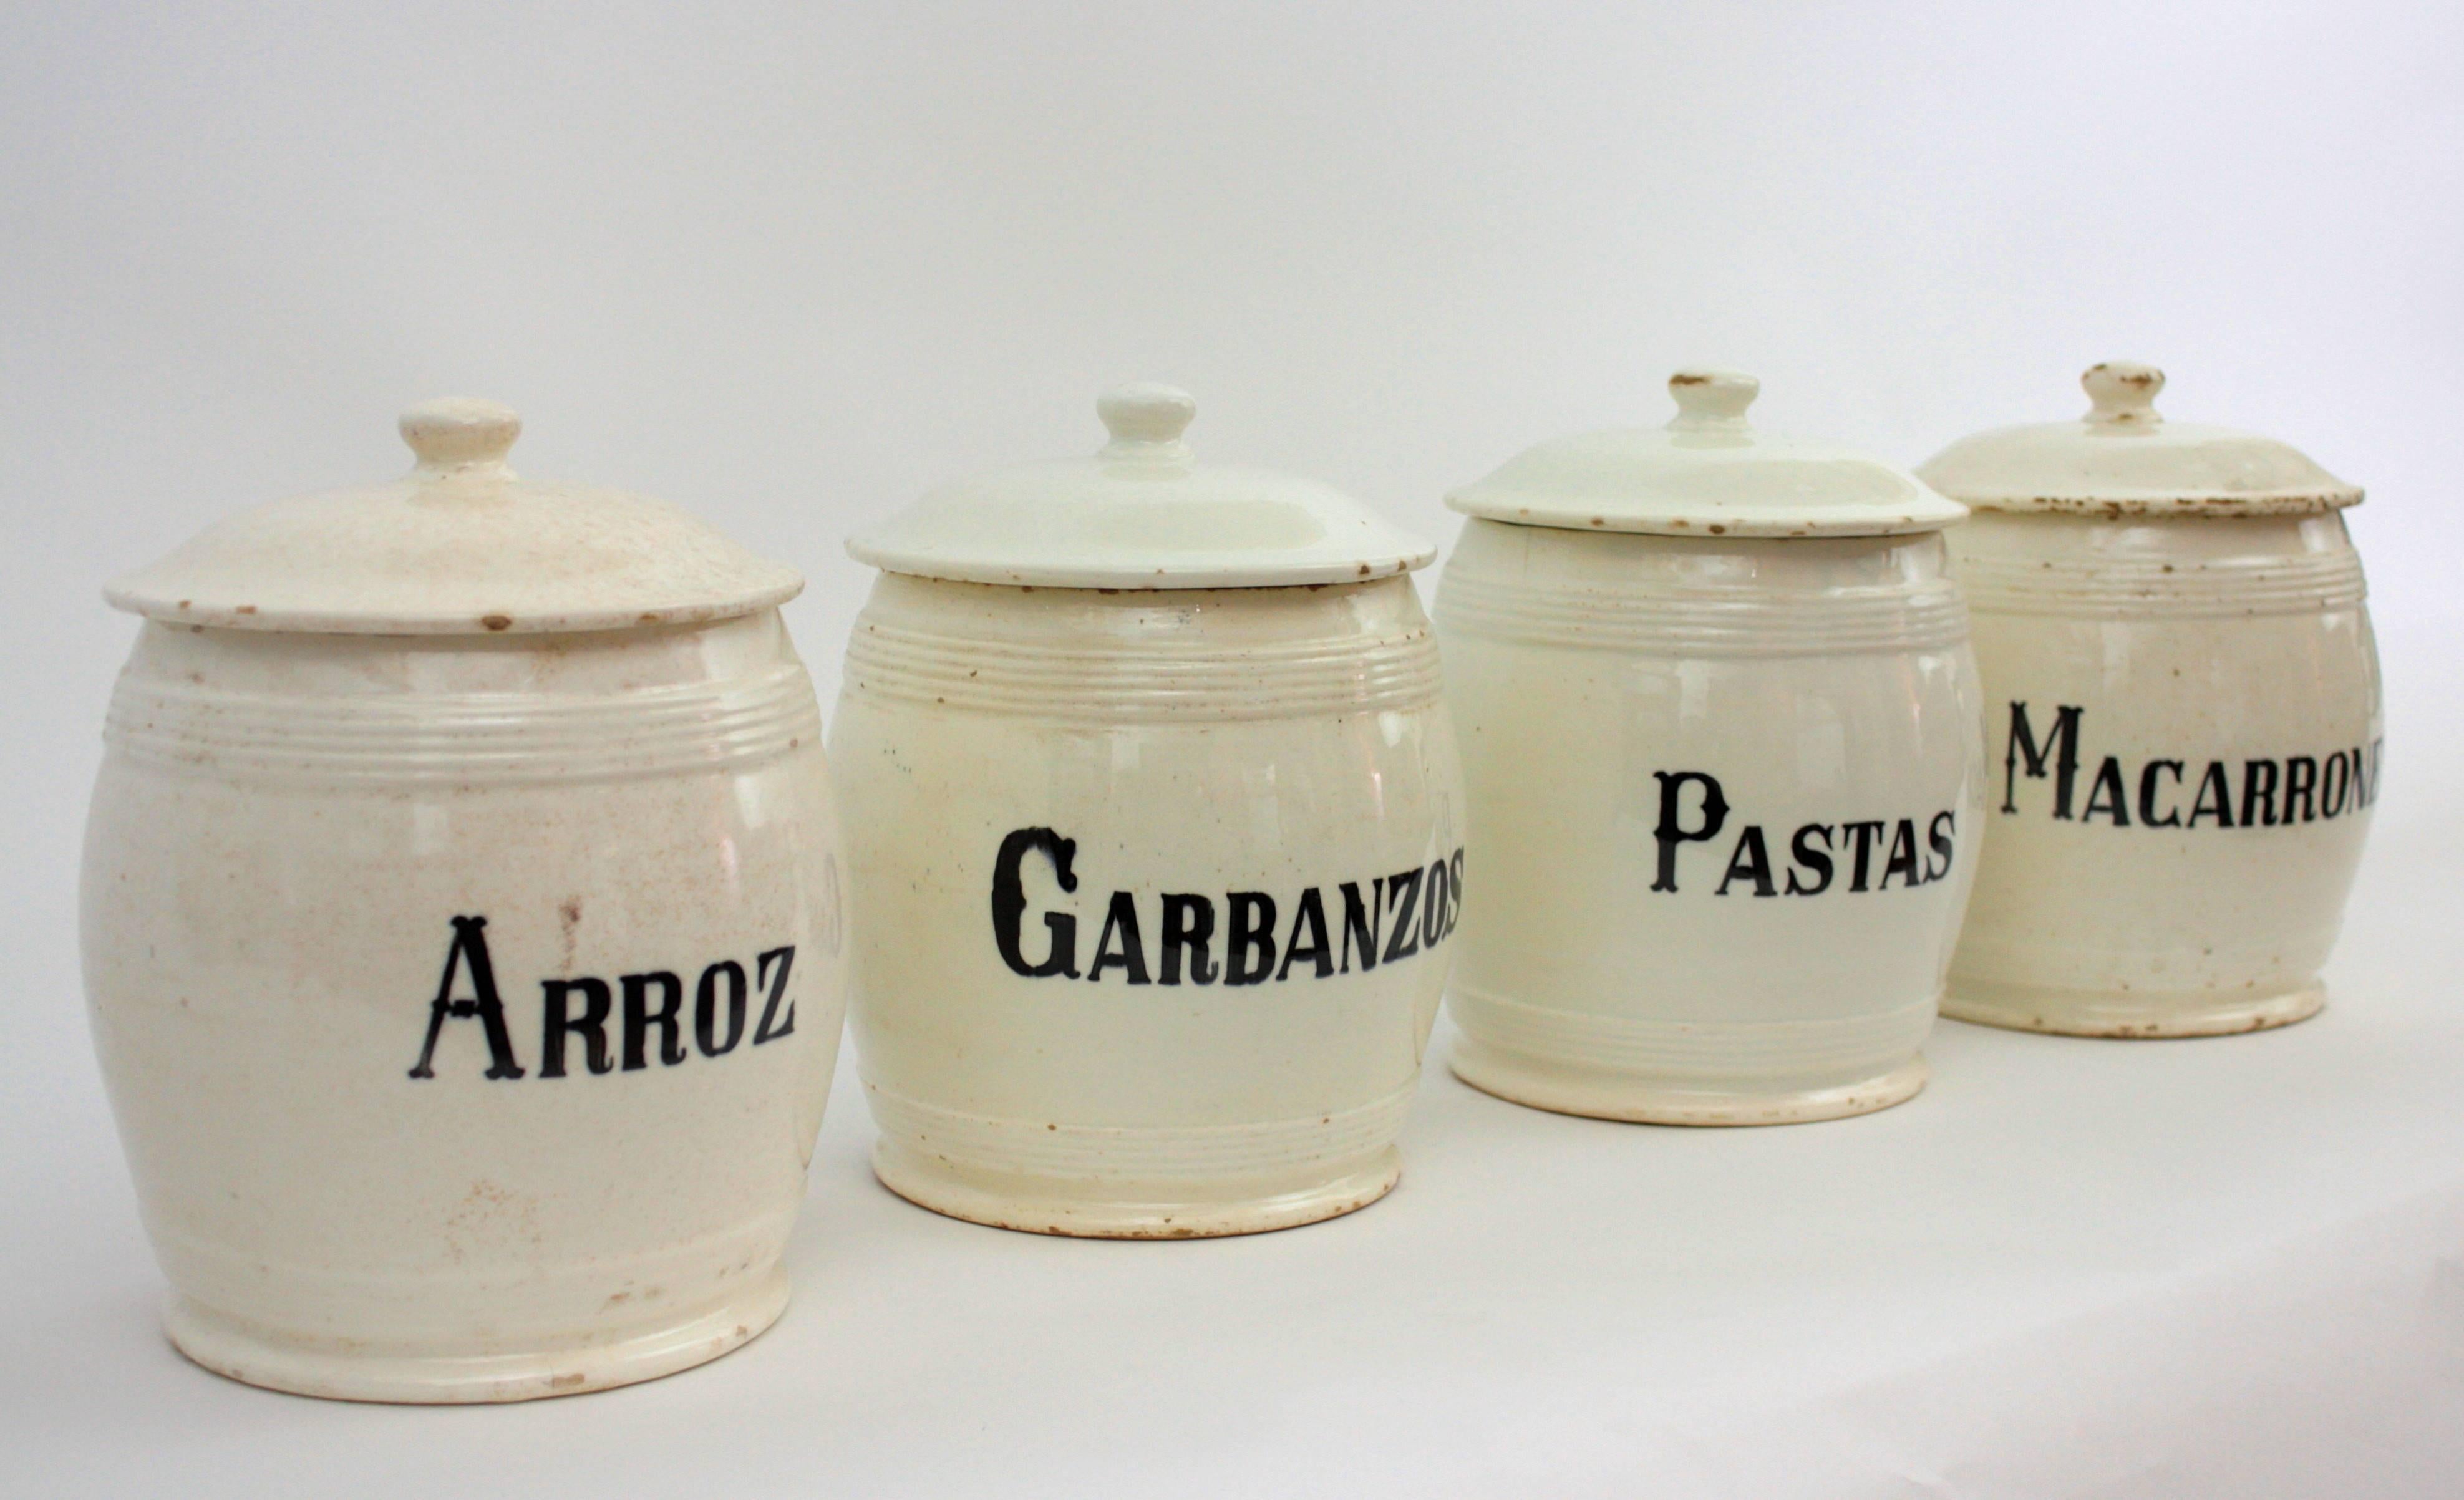 A very decorative set of four kitchen pots used as storage, Macarrones (macaroni), Garbanzos (chickpeas), Arroz (rice), and Pastas (pasta).

Useful for decorative purposes.
      